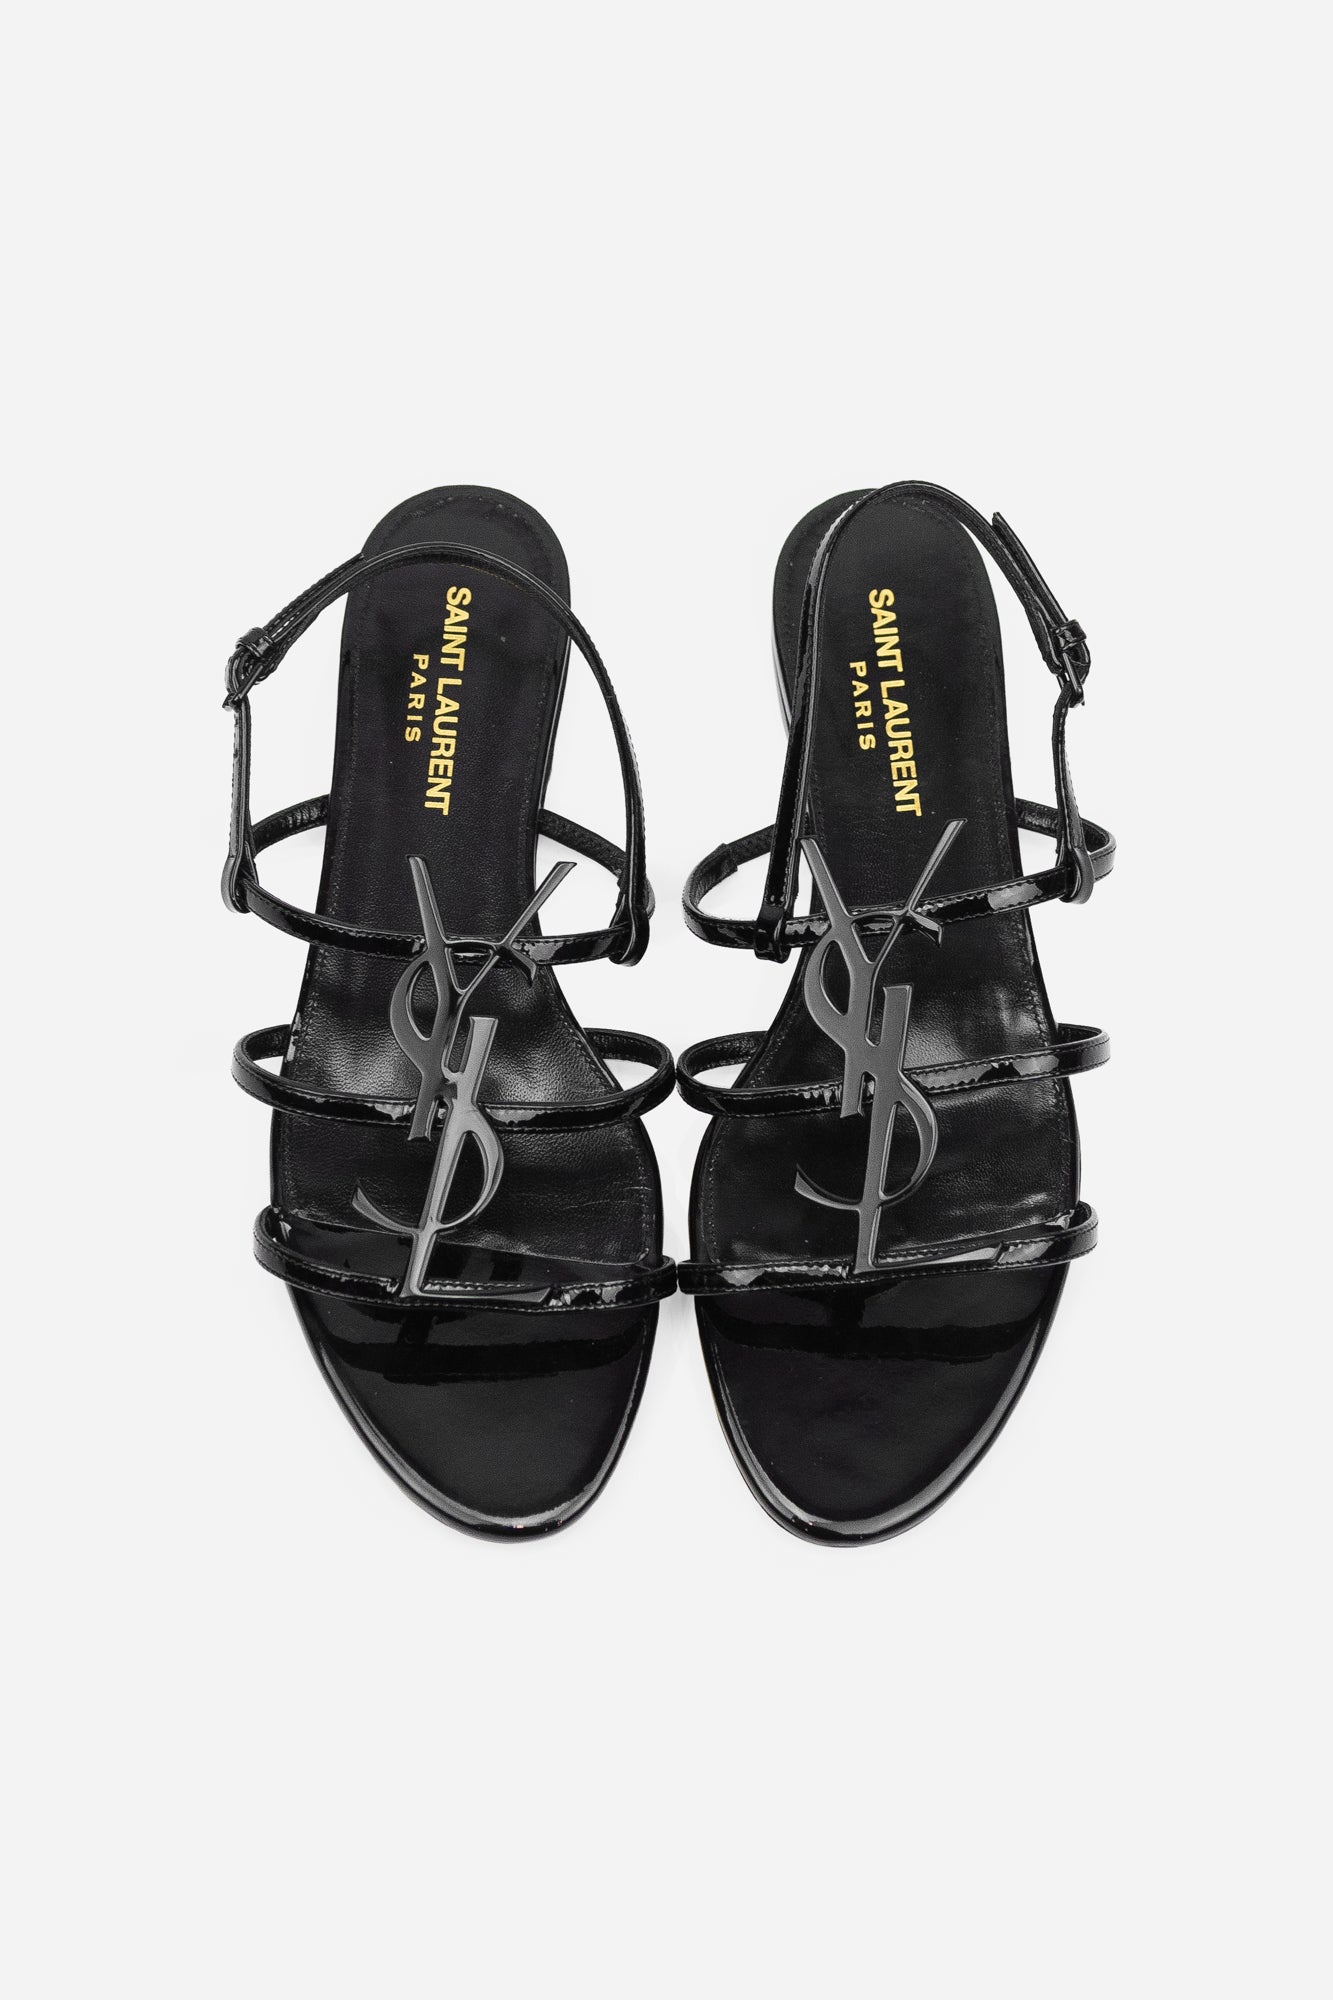 Black Patent Leather Cassandra Logo Flat Sandals - So Over It Luxury Consignment